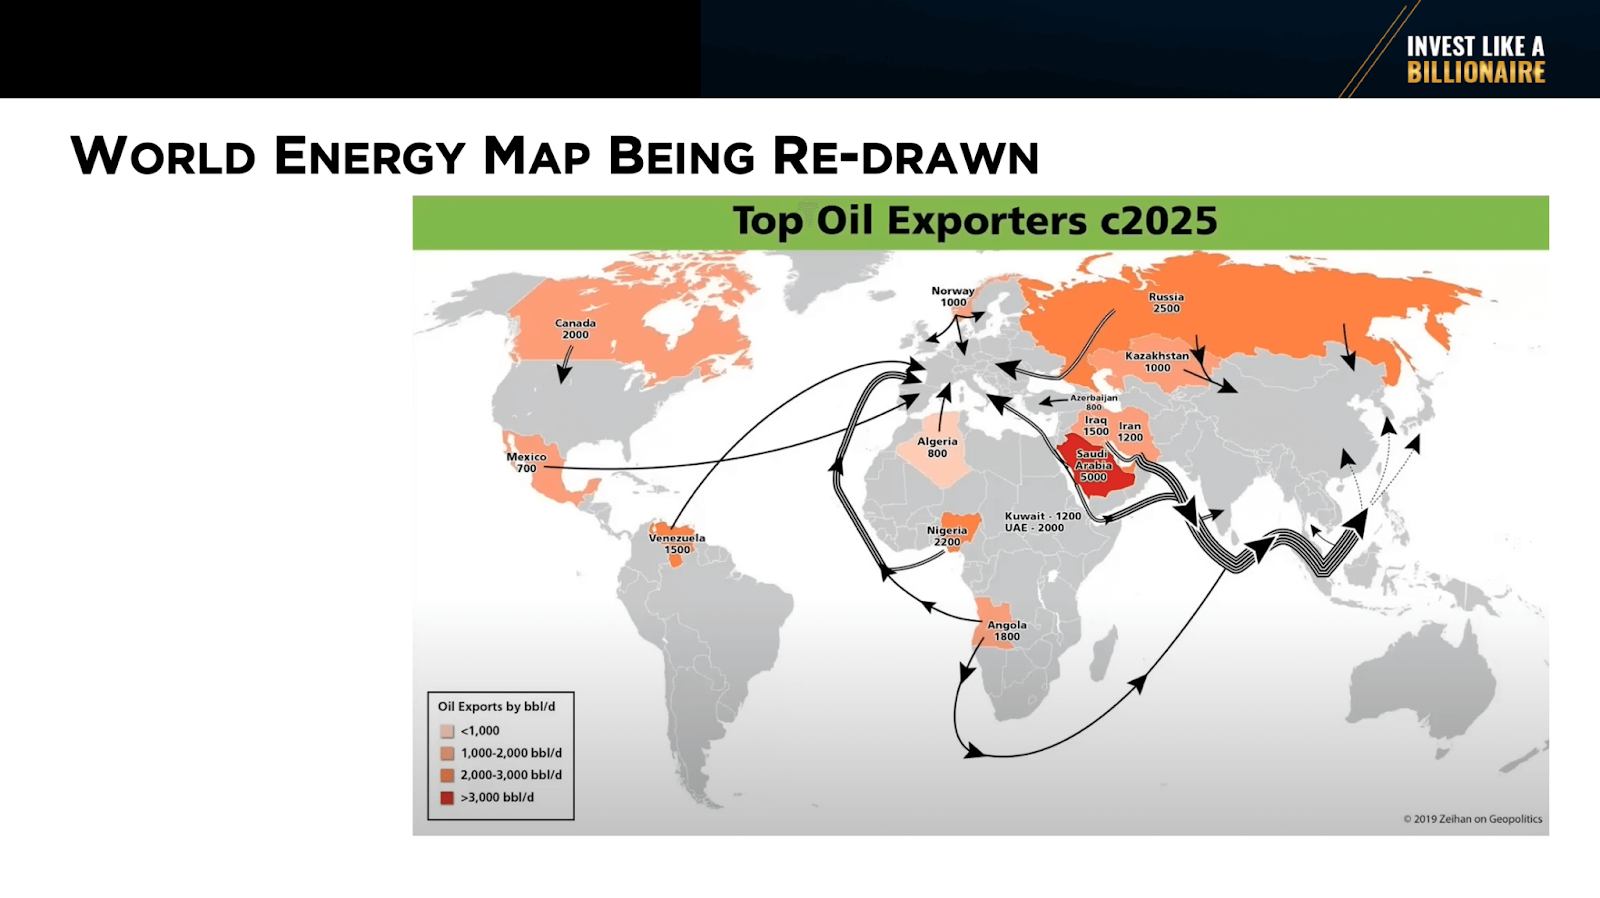 World energy map of top oil exporters around 2025, showing African and Saudi Arabian energy flows being diverted to Europe.